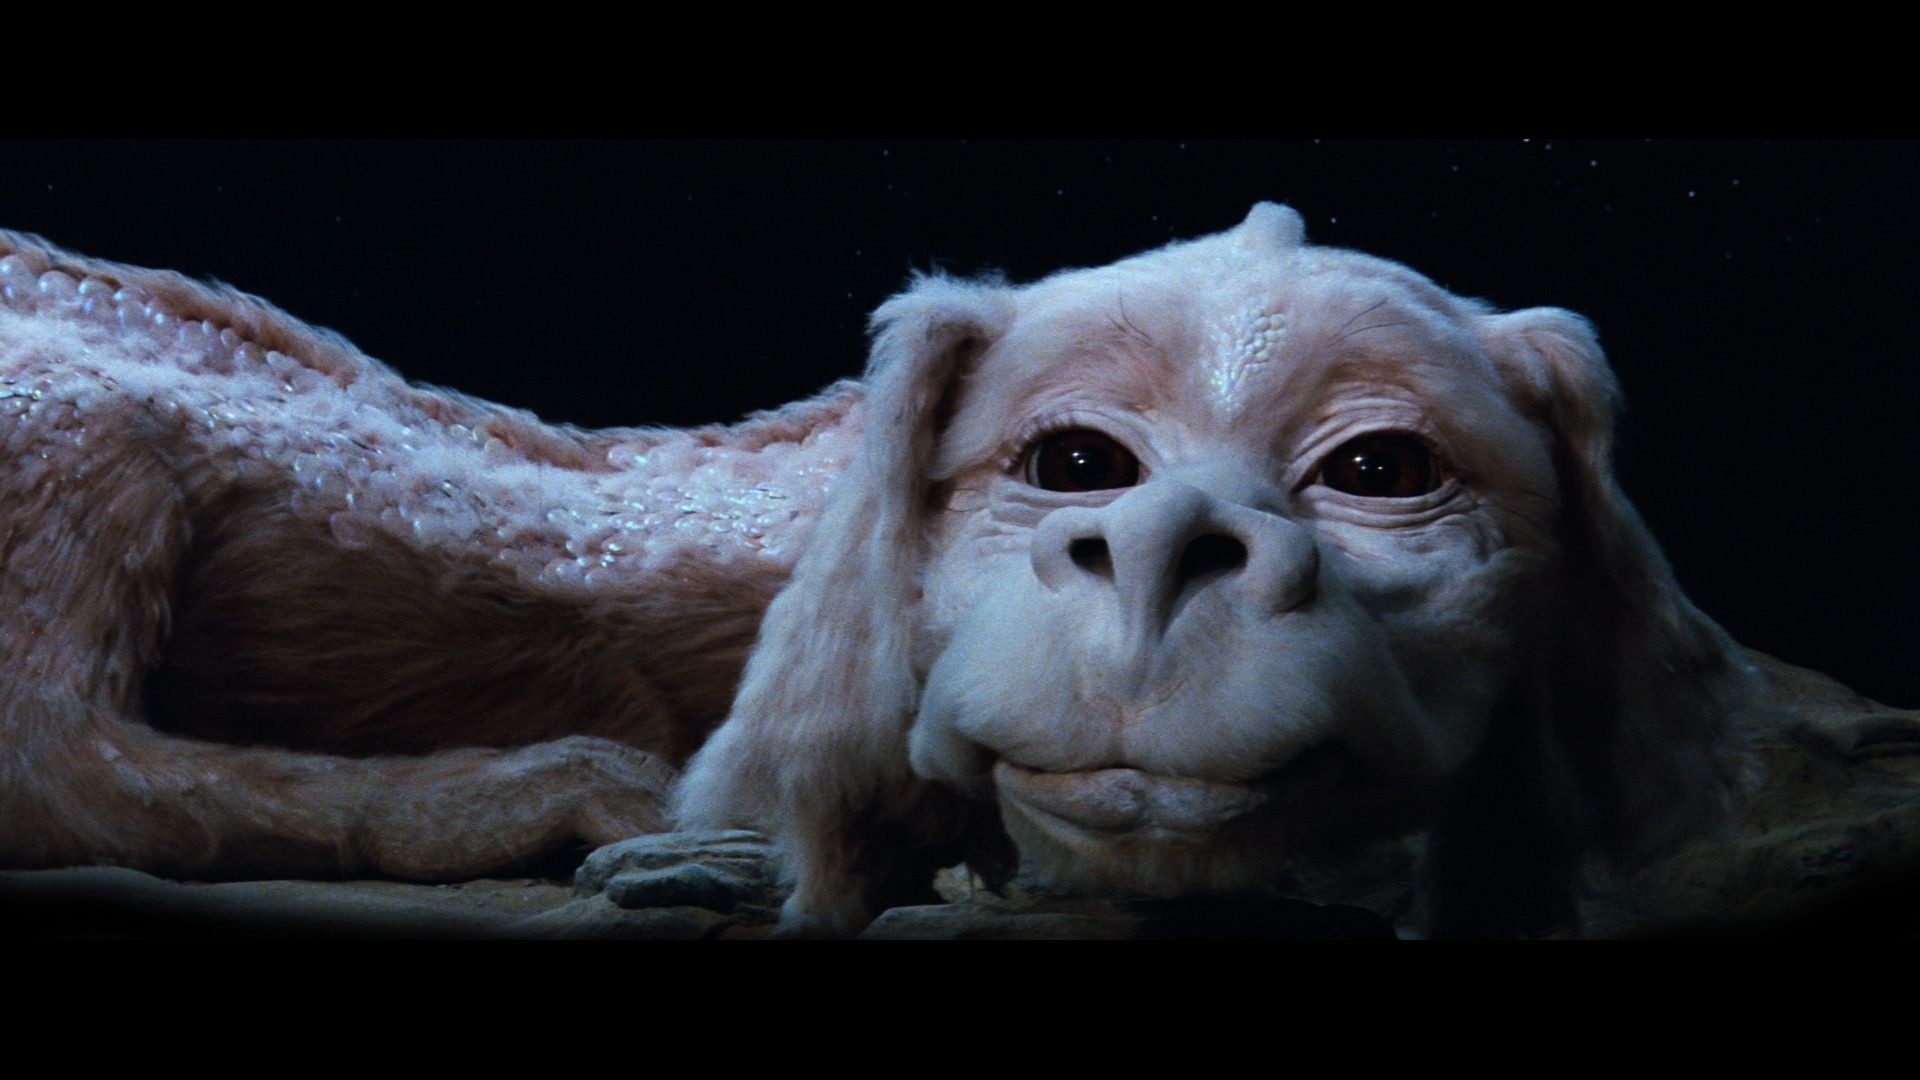 The NeverEnding Story, Love movie, Love photography, Magical, 1920x1080 Full HD Desktop